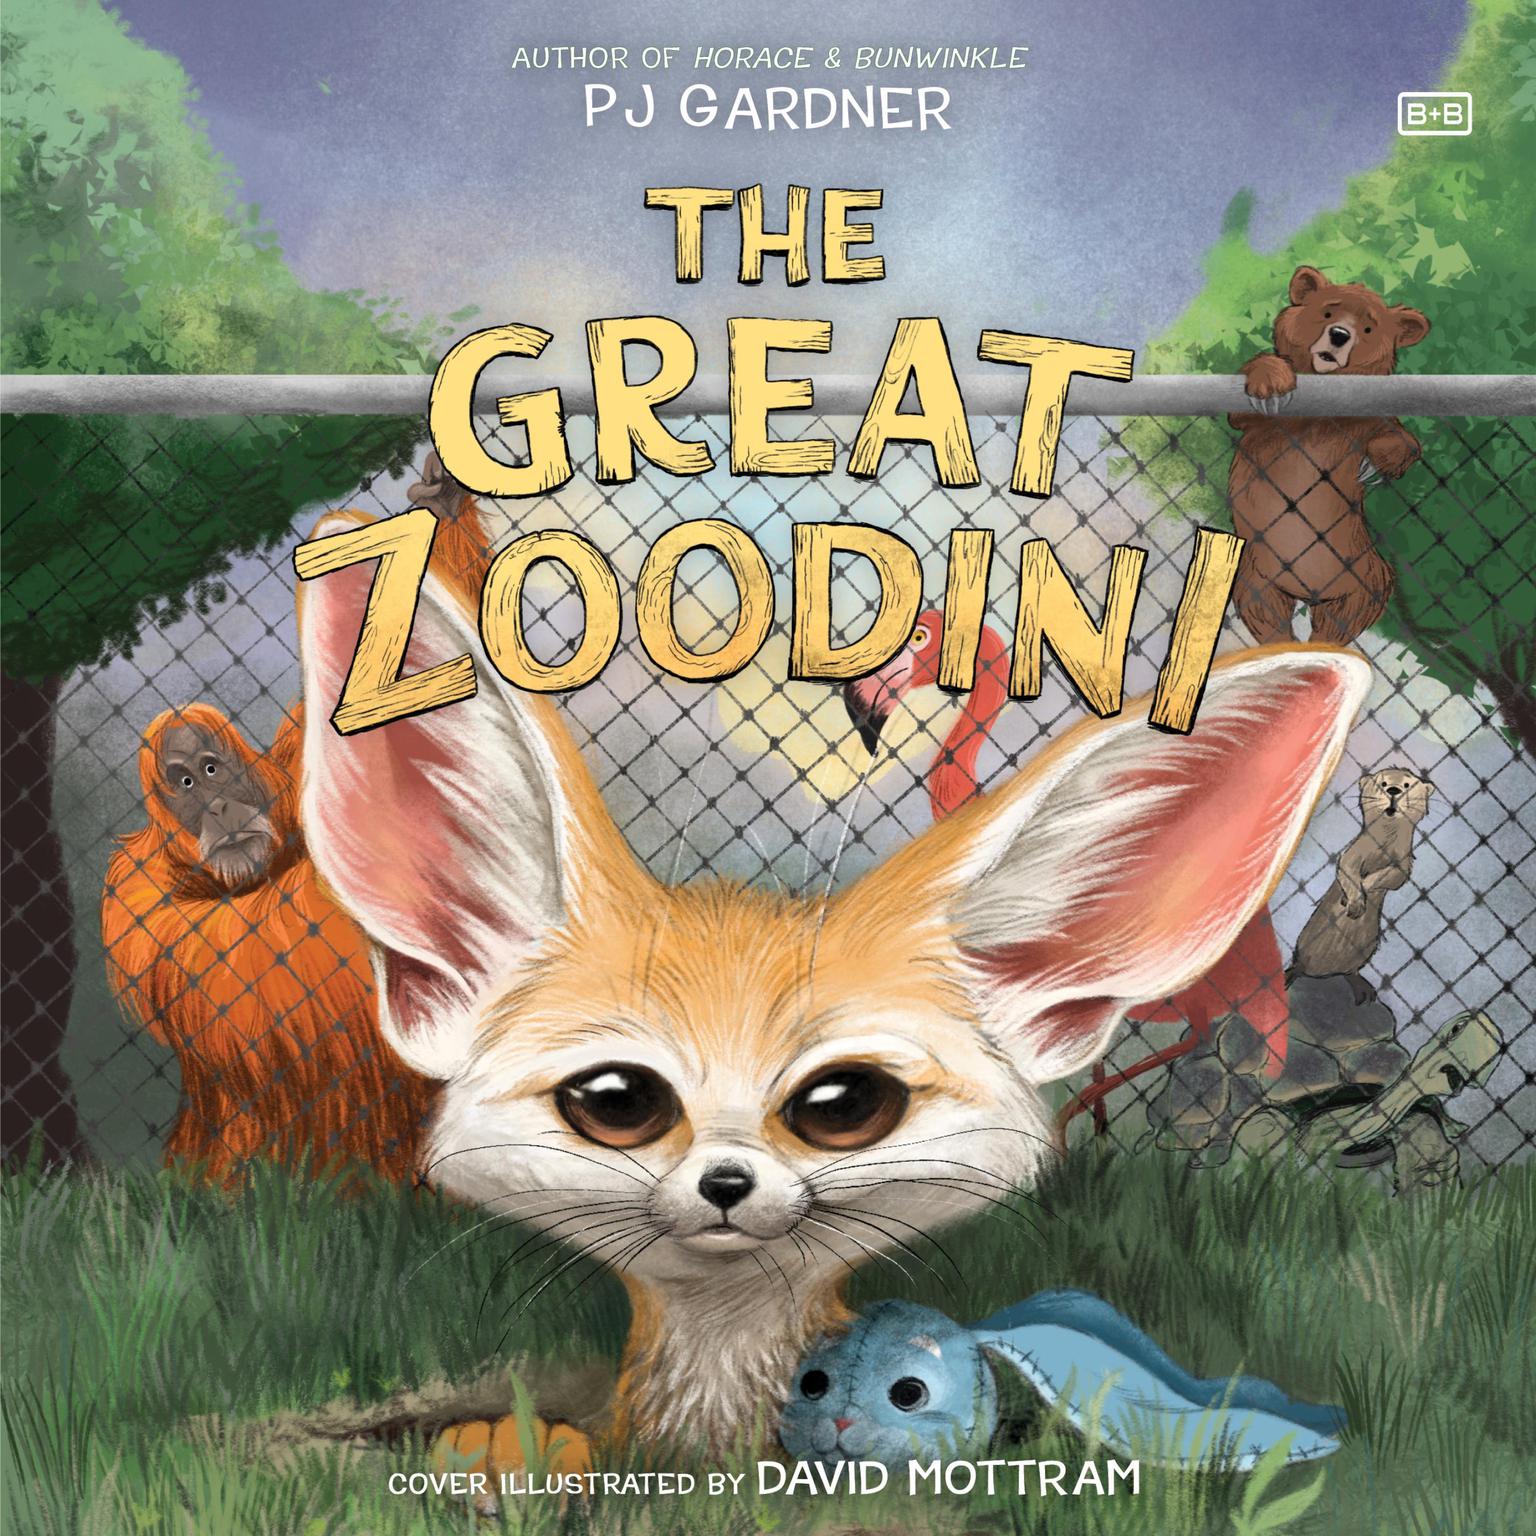 The Great Zoodini (Abridged) Audiobook, by PJ Gardner